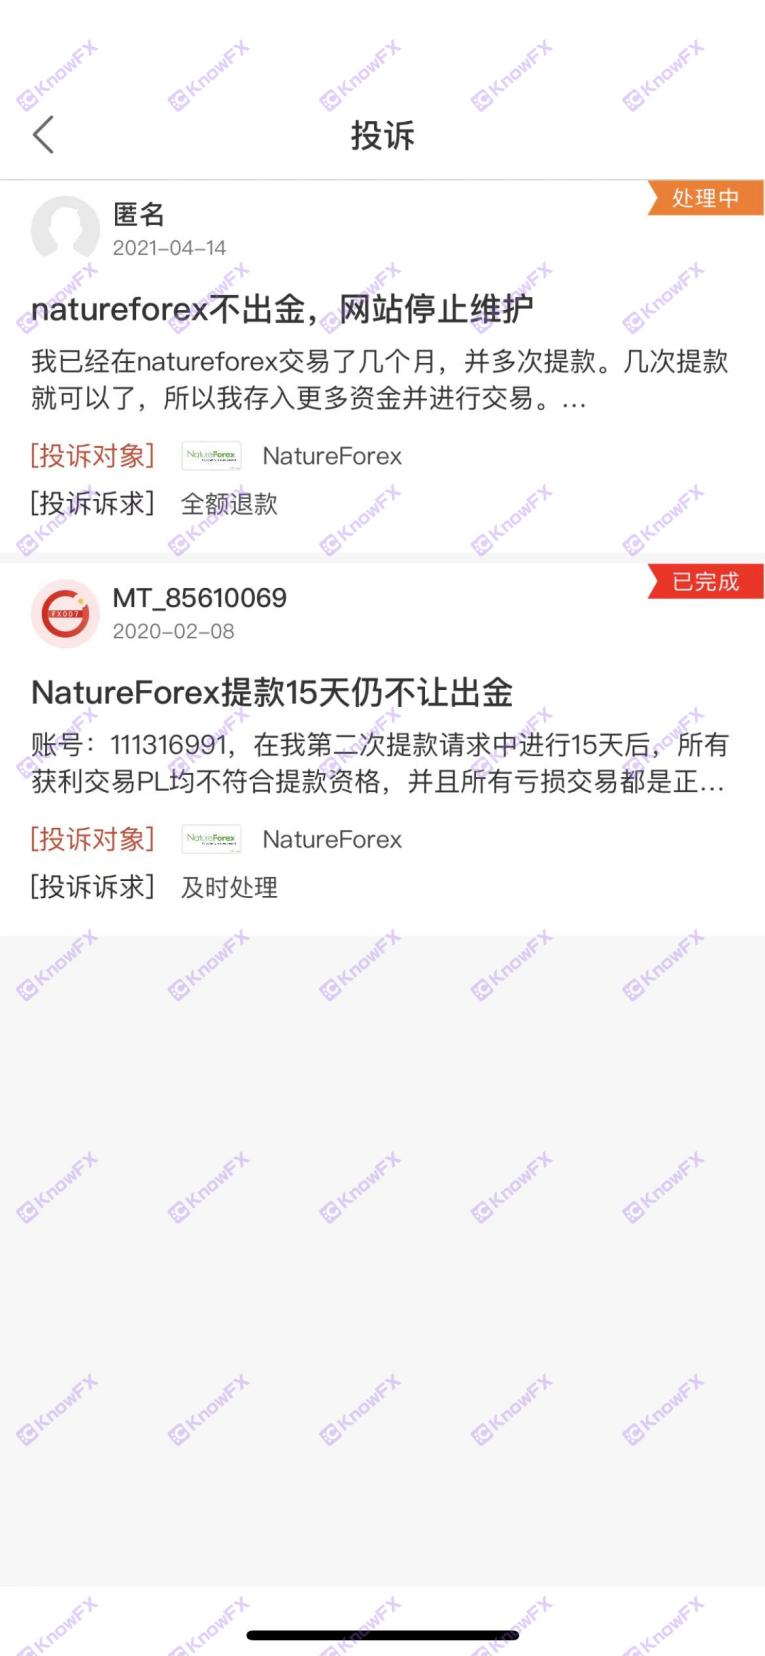 The regulatory card of the securities firm Vatee is fake, fraudulent investors!-第23张图片-要懂汇圈网